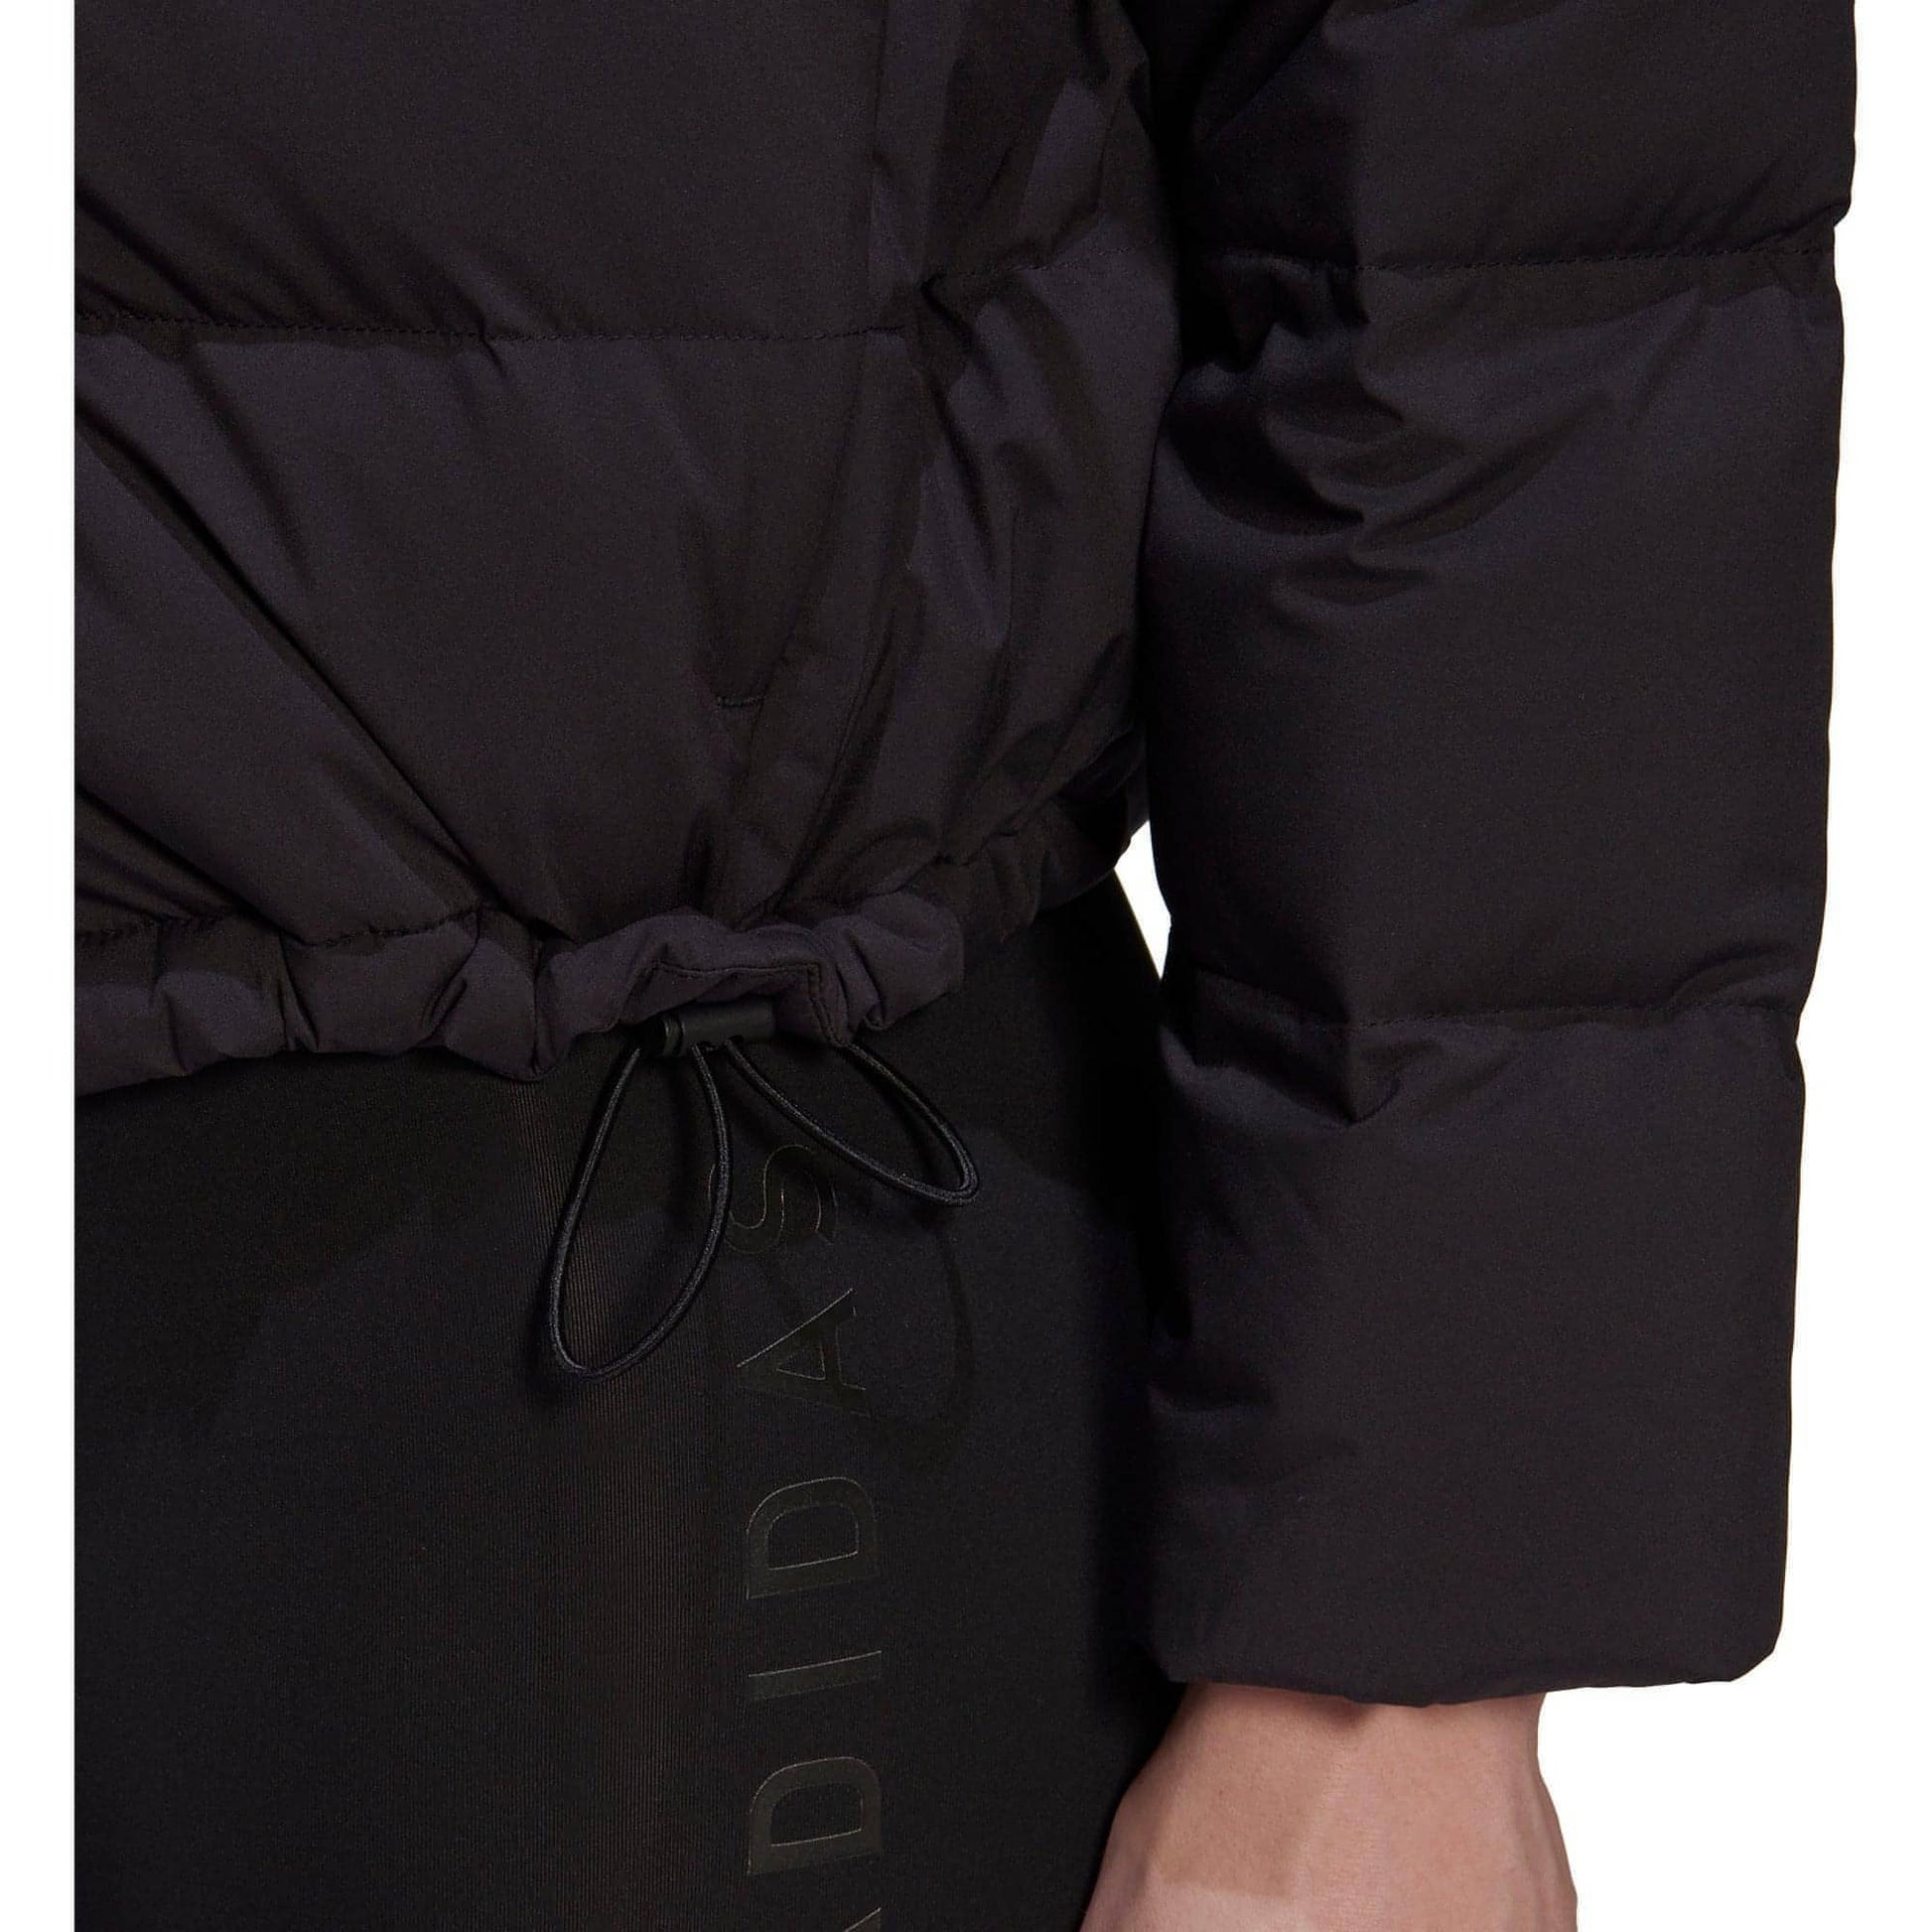 Adidas Helionic Relaxed Down Jacket Hg8696 Details